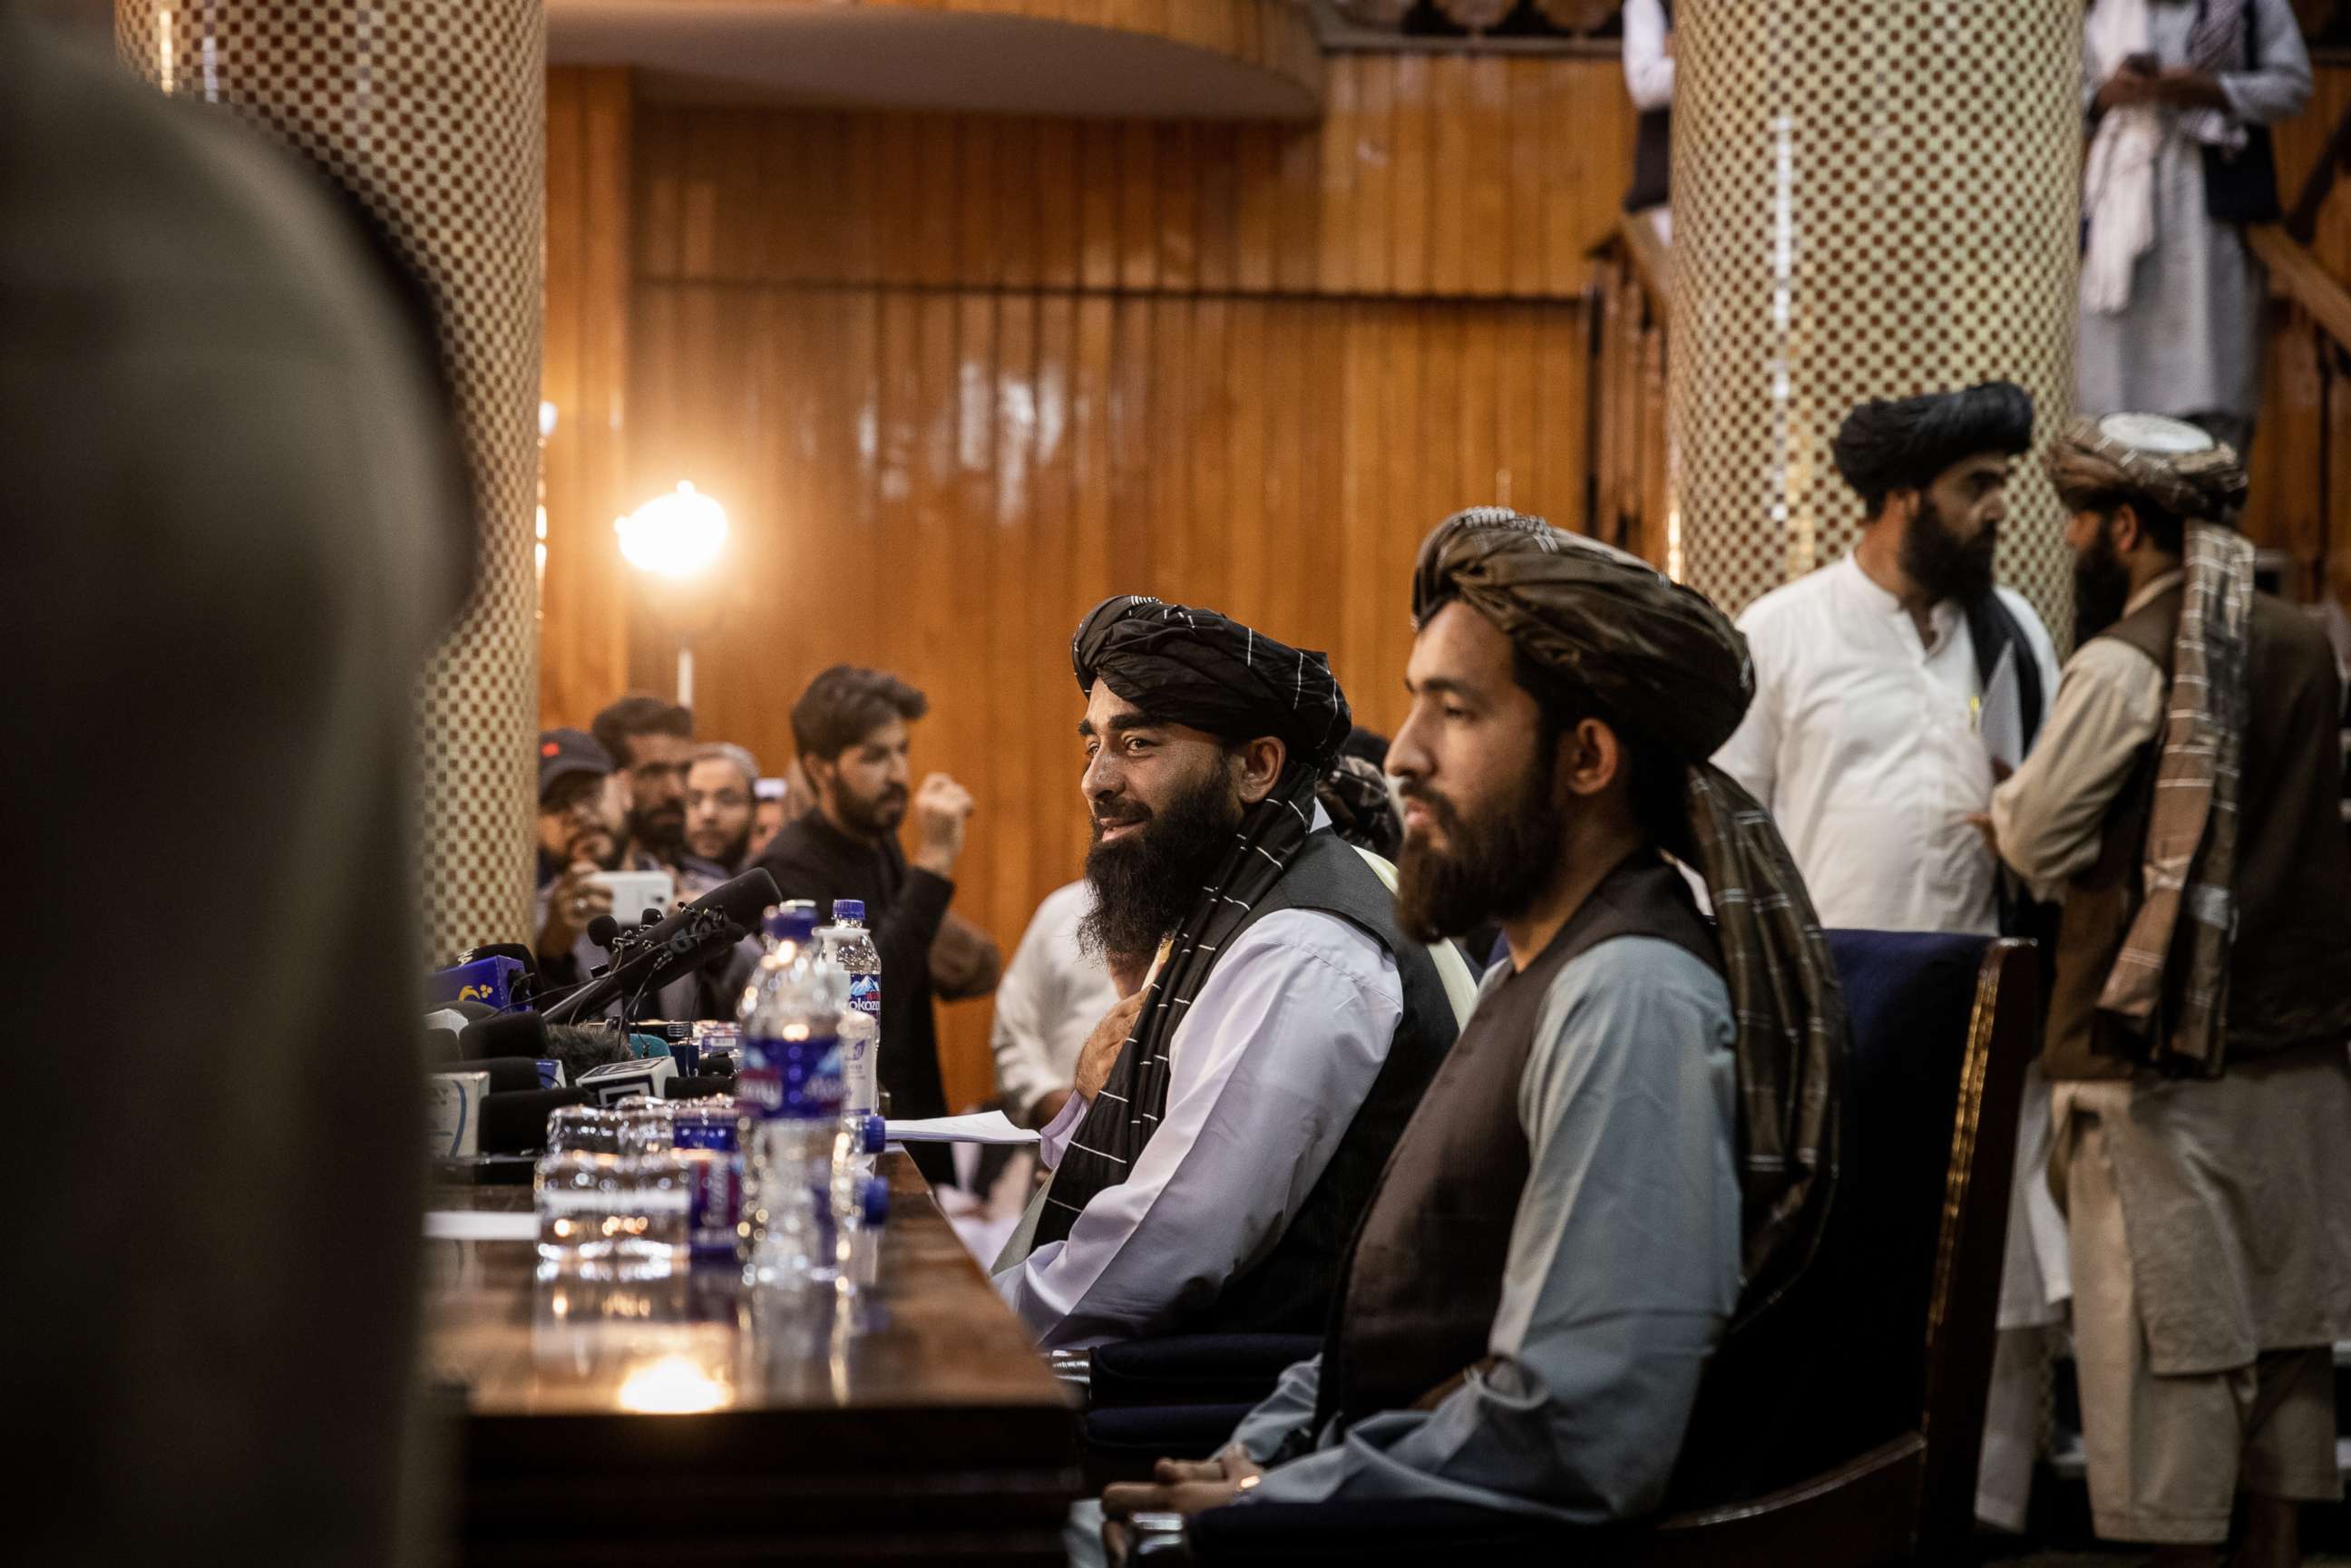 PHOTO: Zabihullah Mujahid, center, the Taliban's spokesperson, speaks to the media in Kabul, Afghanistan on Aug. 17, 2021, at their first news conference after they took control of Kabul.